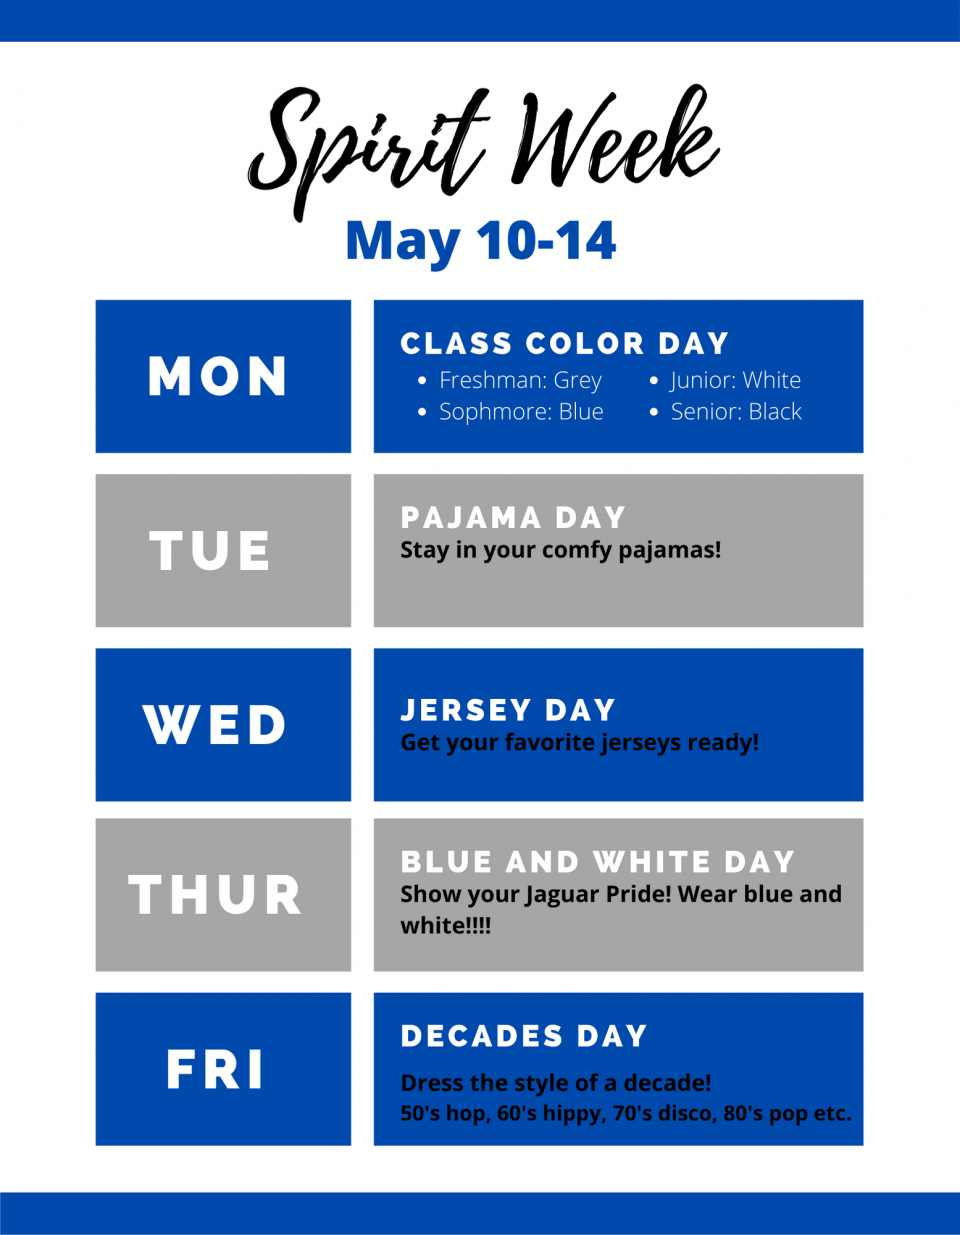 spirit week may 10-14. monday is class color day. freshman wear grey, sophmore wear blue, junior wear white, senior wear black. tuesday is pj day. wednesday is jersey day. thursday is blue and white day. friday is decades day.